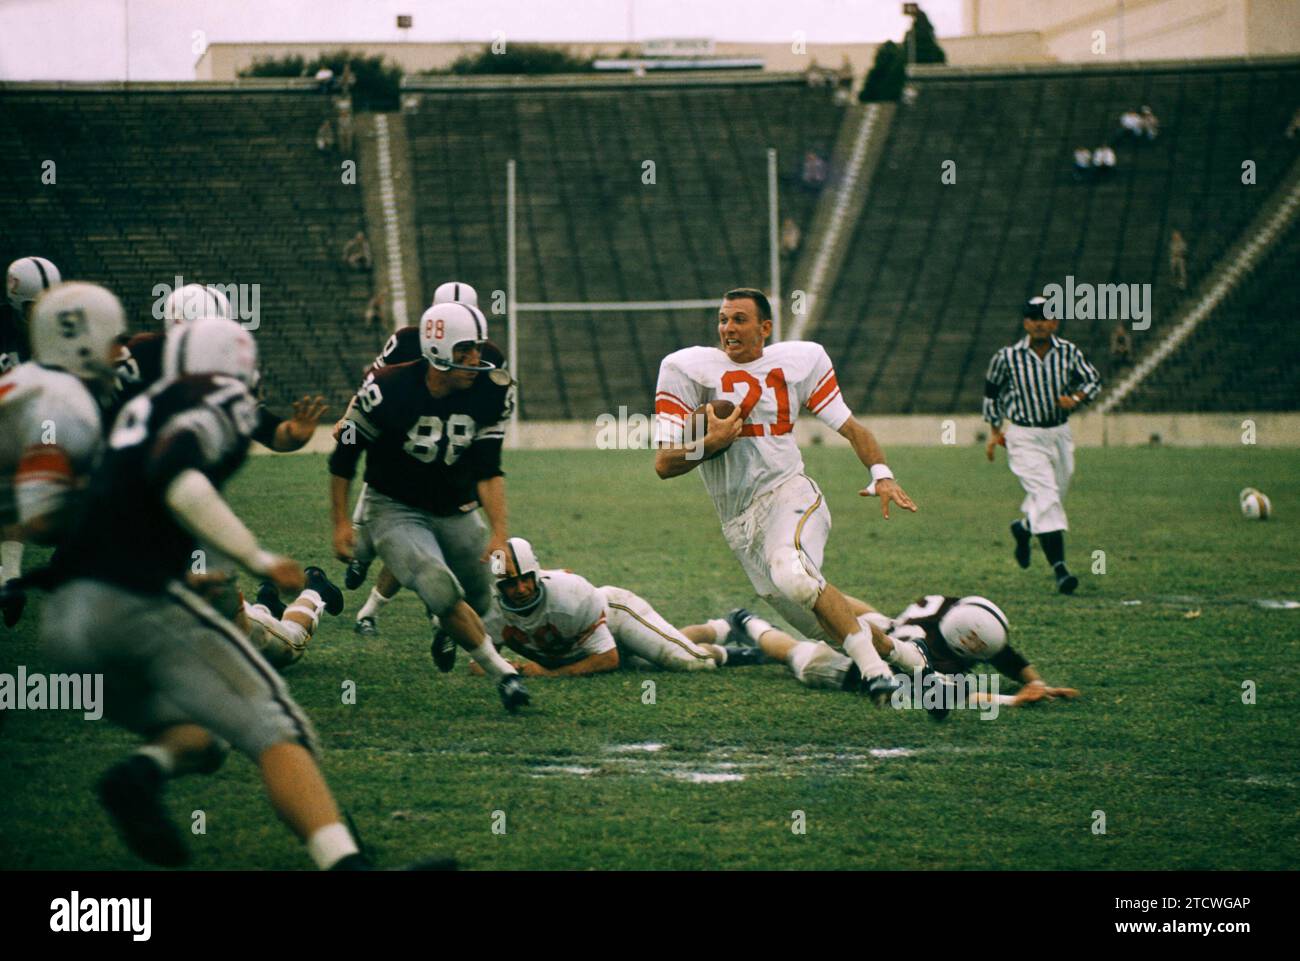 DALLAS, TX - SEPTEMBER 21:  An unidentified player of the Maryland Terrapins runs with the ball without his helmet after intercepting a pass during the game against the #2 ranked Texas A&M Aggies on September 21, 1957 at the Cotton Bowl in Dallas, Texas.  The Aggies defetead the Terrapins 21-13.  (Photo by Hy Peskin) Stock Photo